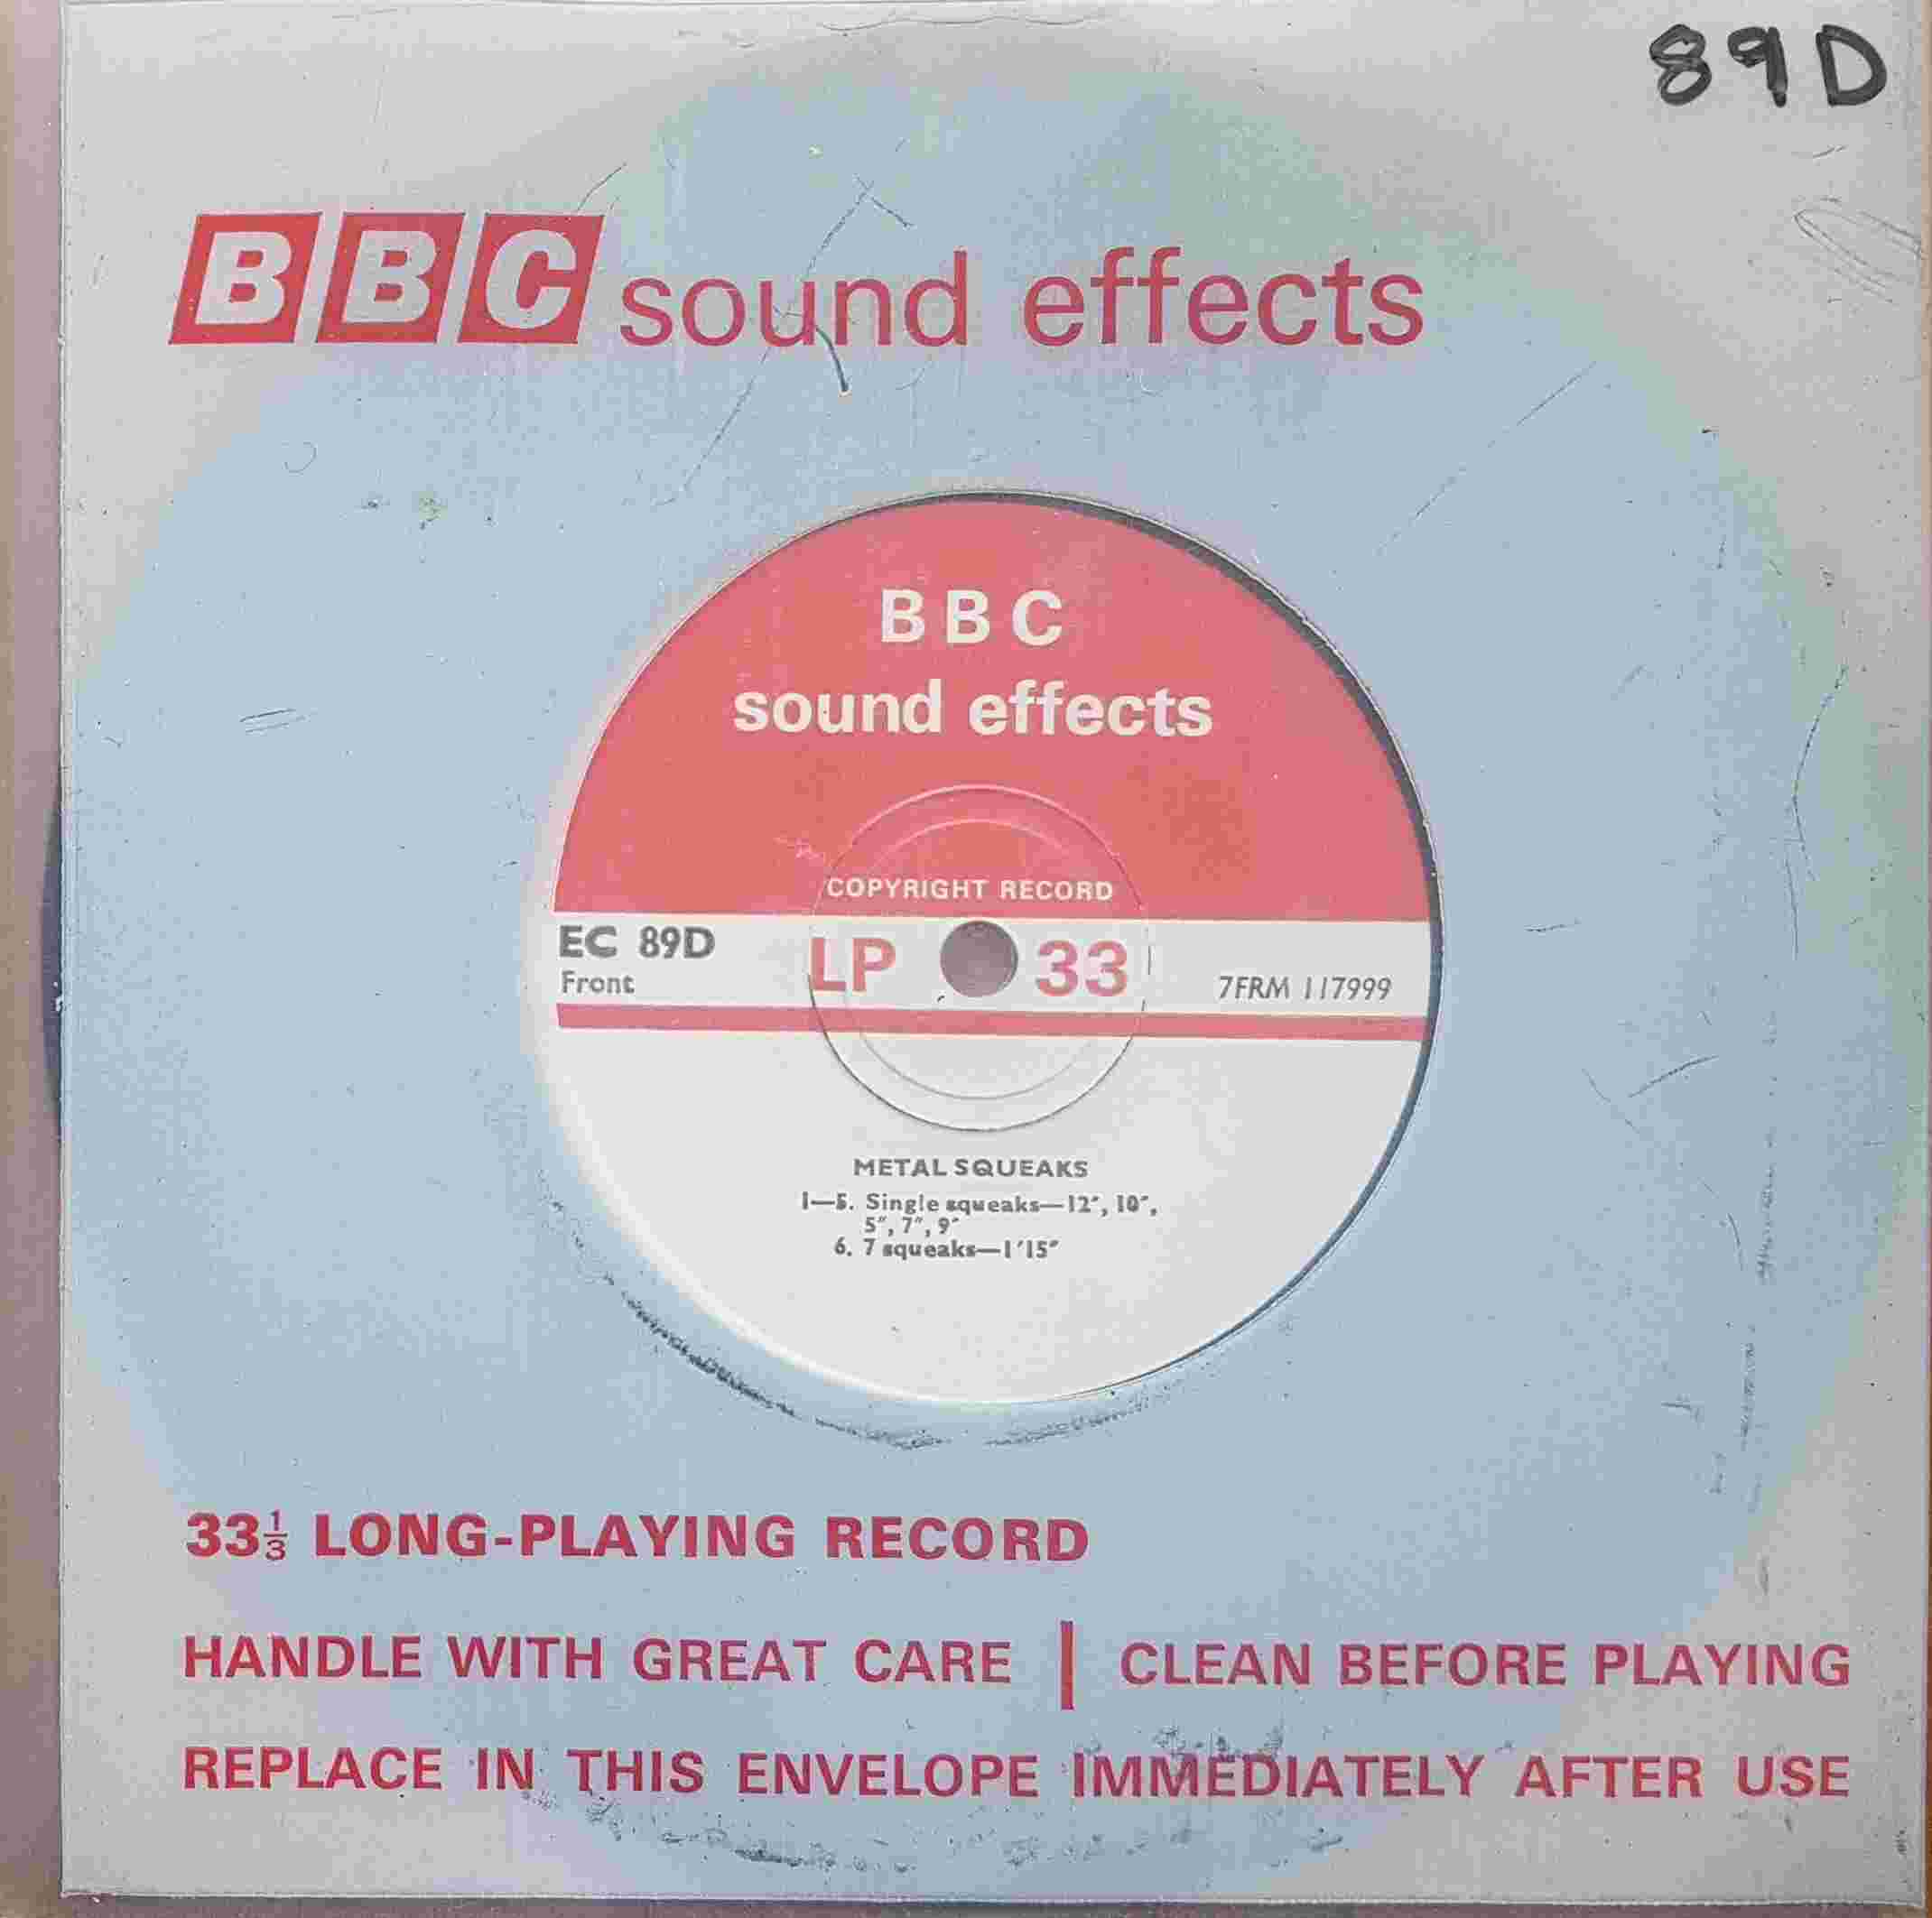 Picture of EC 89D Metal squeaks by artist Not registered from the BBC singles - Records and Tapes library